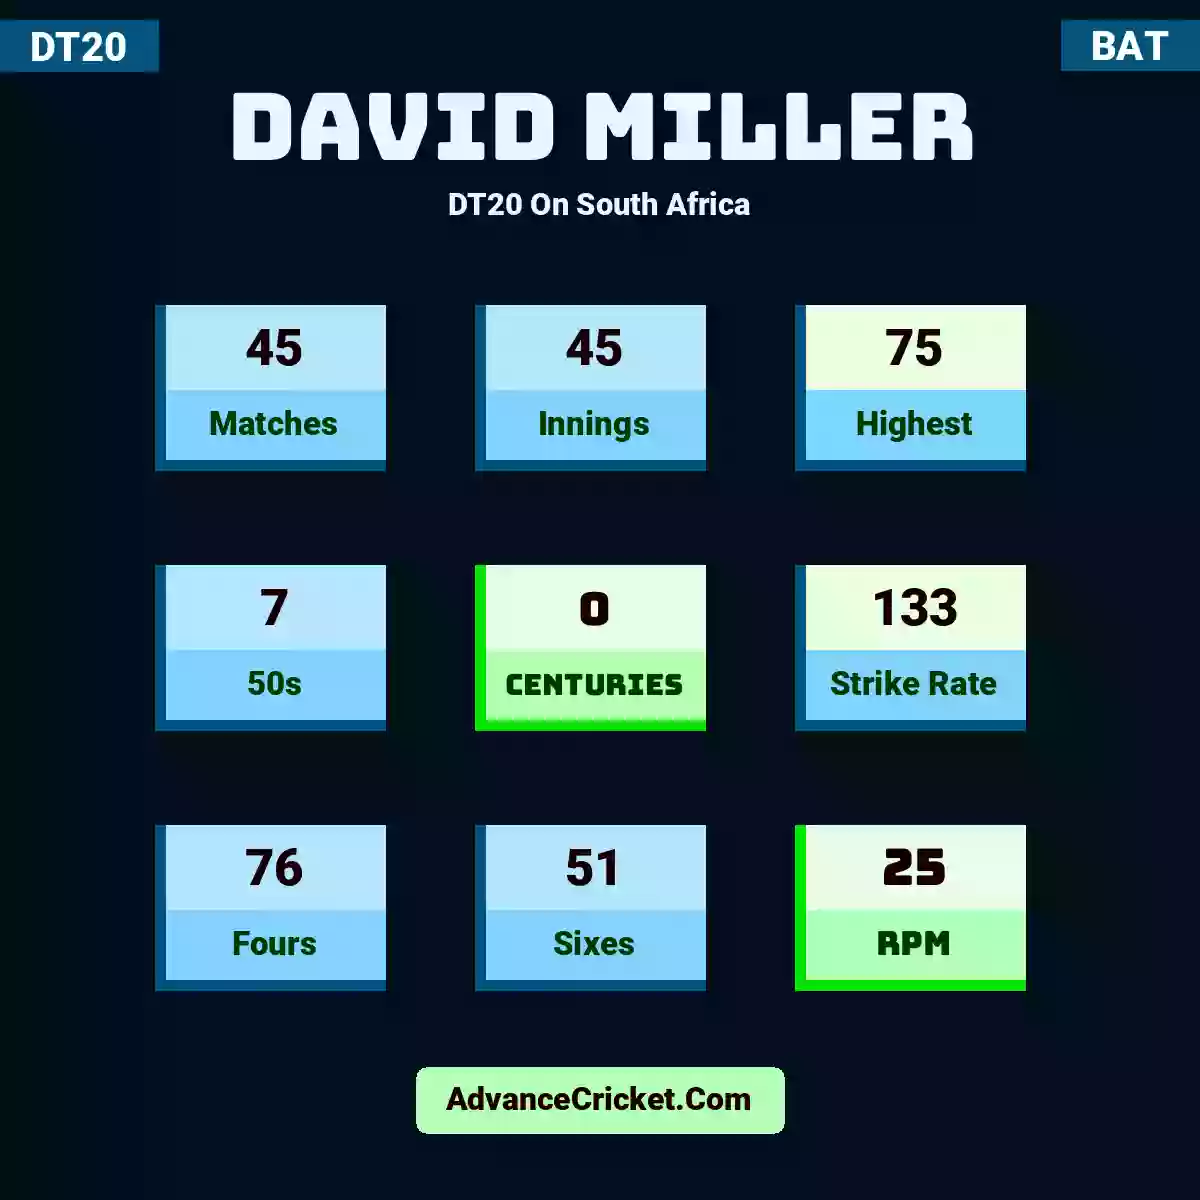 David Miller DT20  On South Africa, David Miller played 45 matches, scored 75 runs as highest, 7 half-centuries, and 0 centuries, with a strike rate of 133. D.Miller hit 76 fours and 51 sixes, with an RPM of 25.